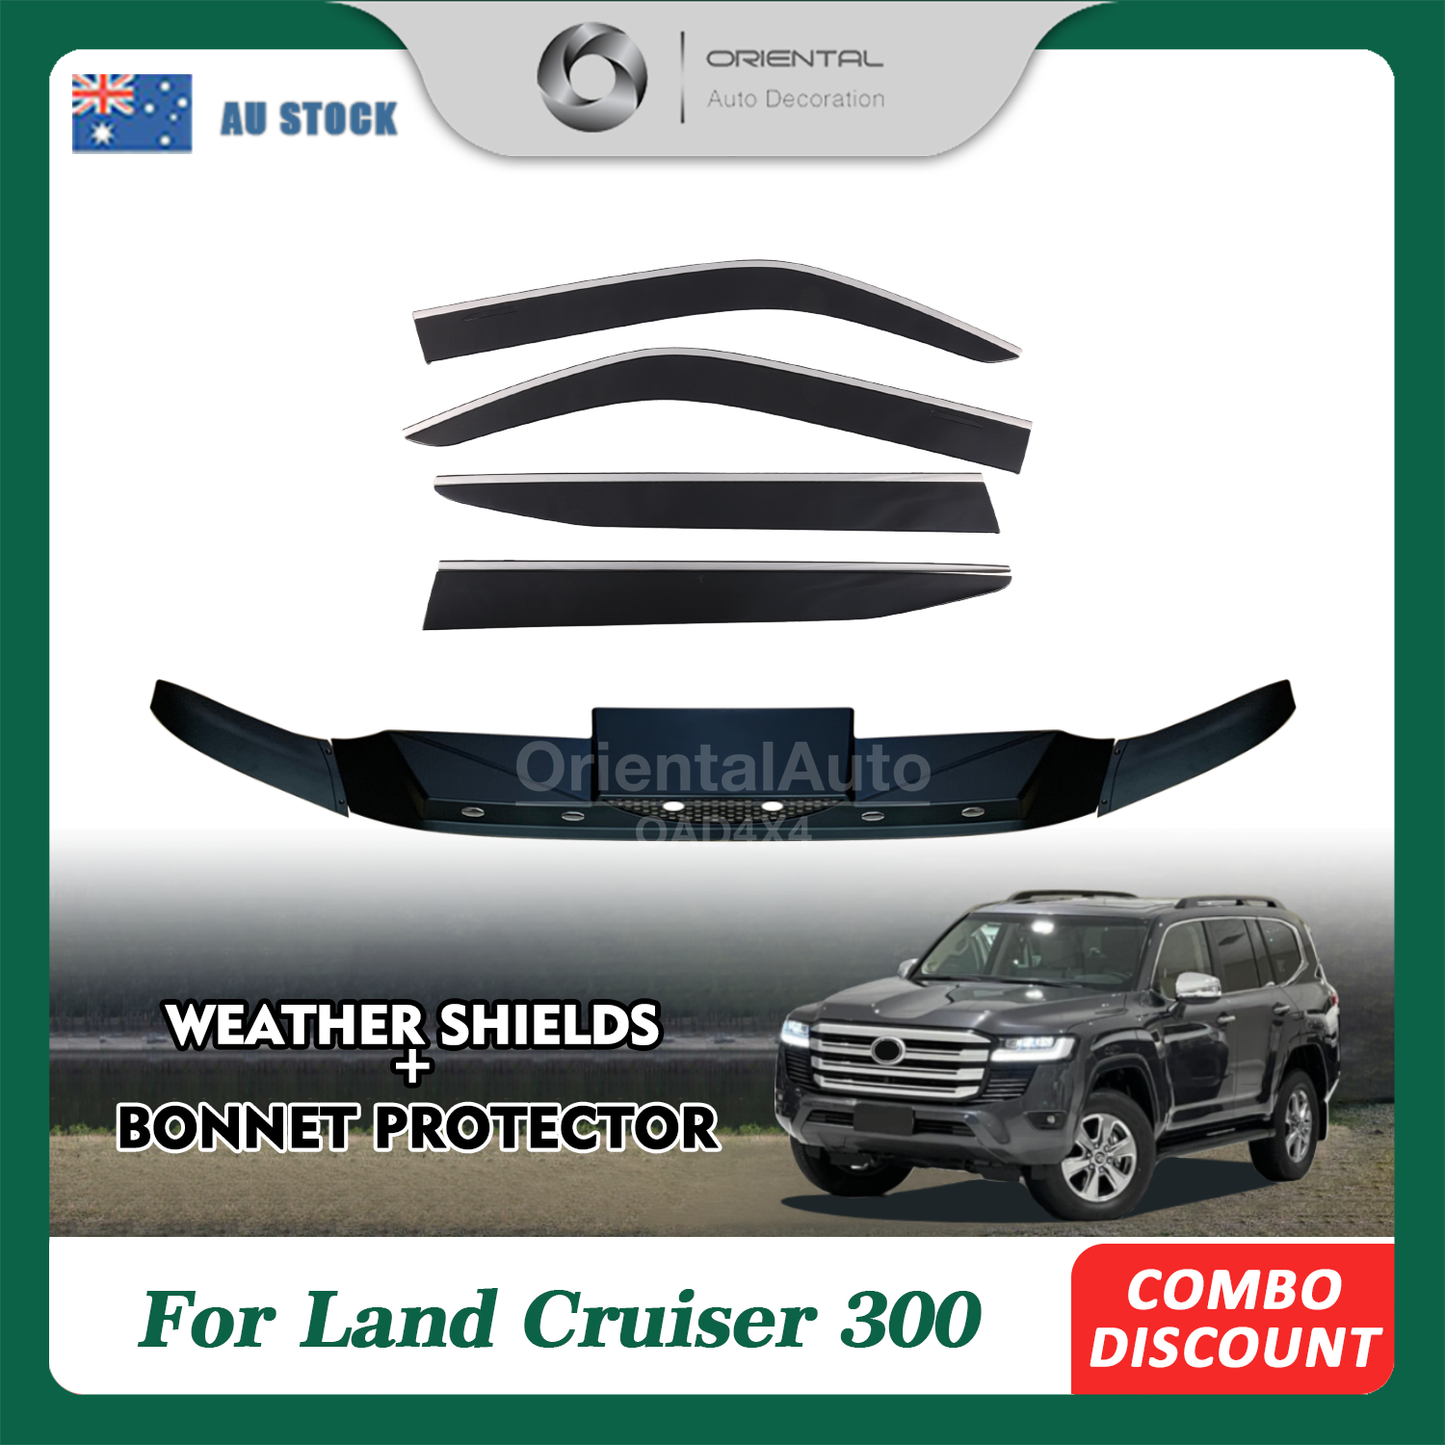 Injection Bonnet Protector & Injection Stainless Weathershields for Toyota Landcruiser 300 Land cruiser 300 LC300 2021-Onwards Weather Shields Window Visor Hood Protector Bonnet Guard